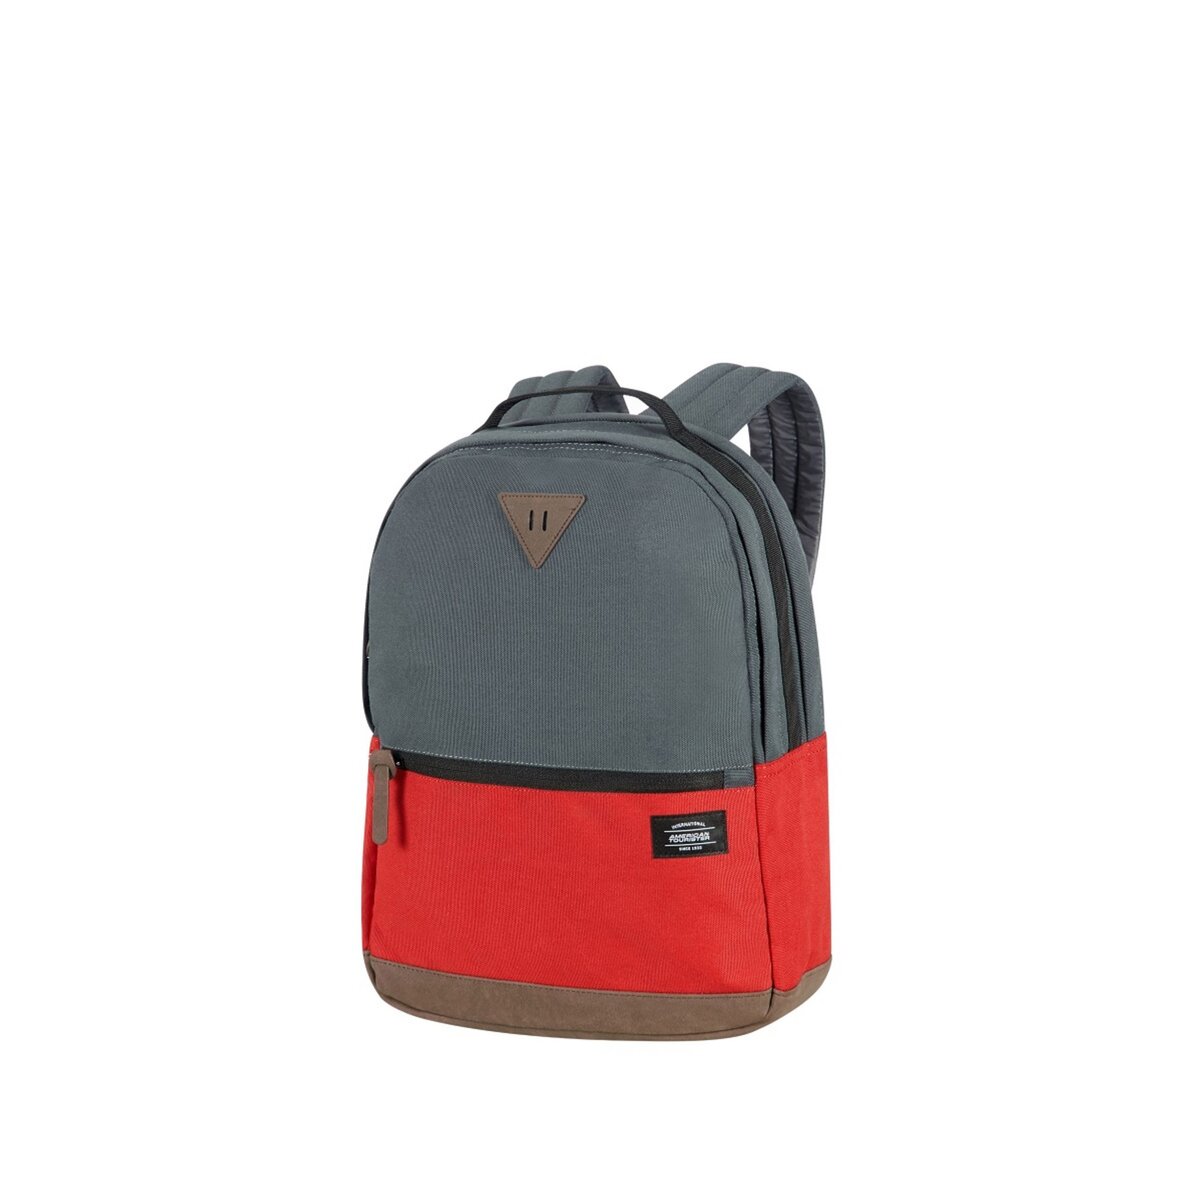 AMERICAN TOURISTER Sac à dos 15.6 Gris/Rouge URBAN GROOVE